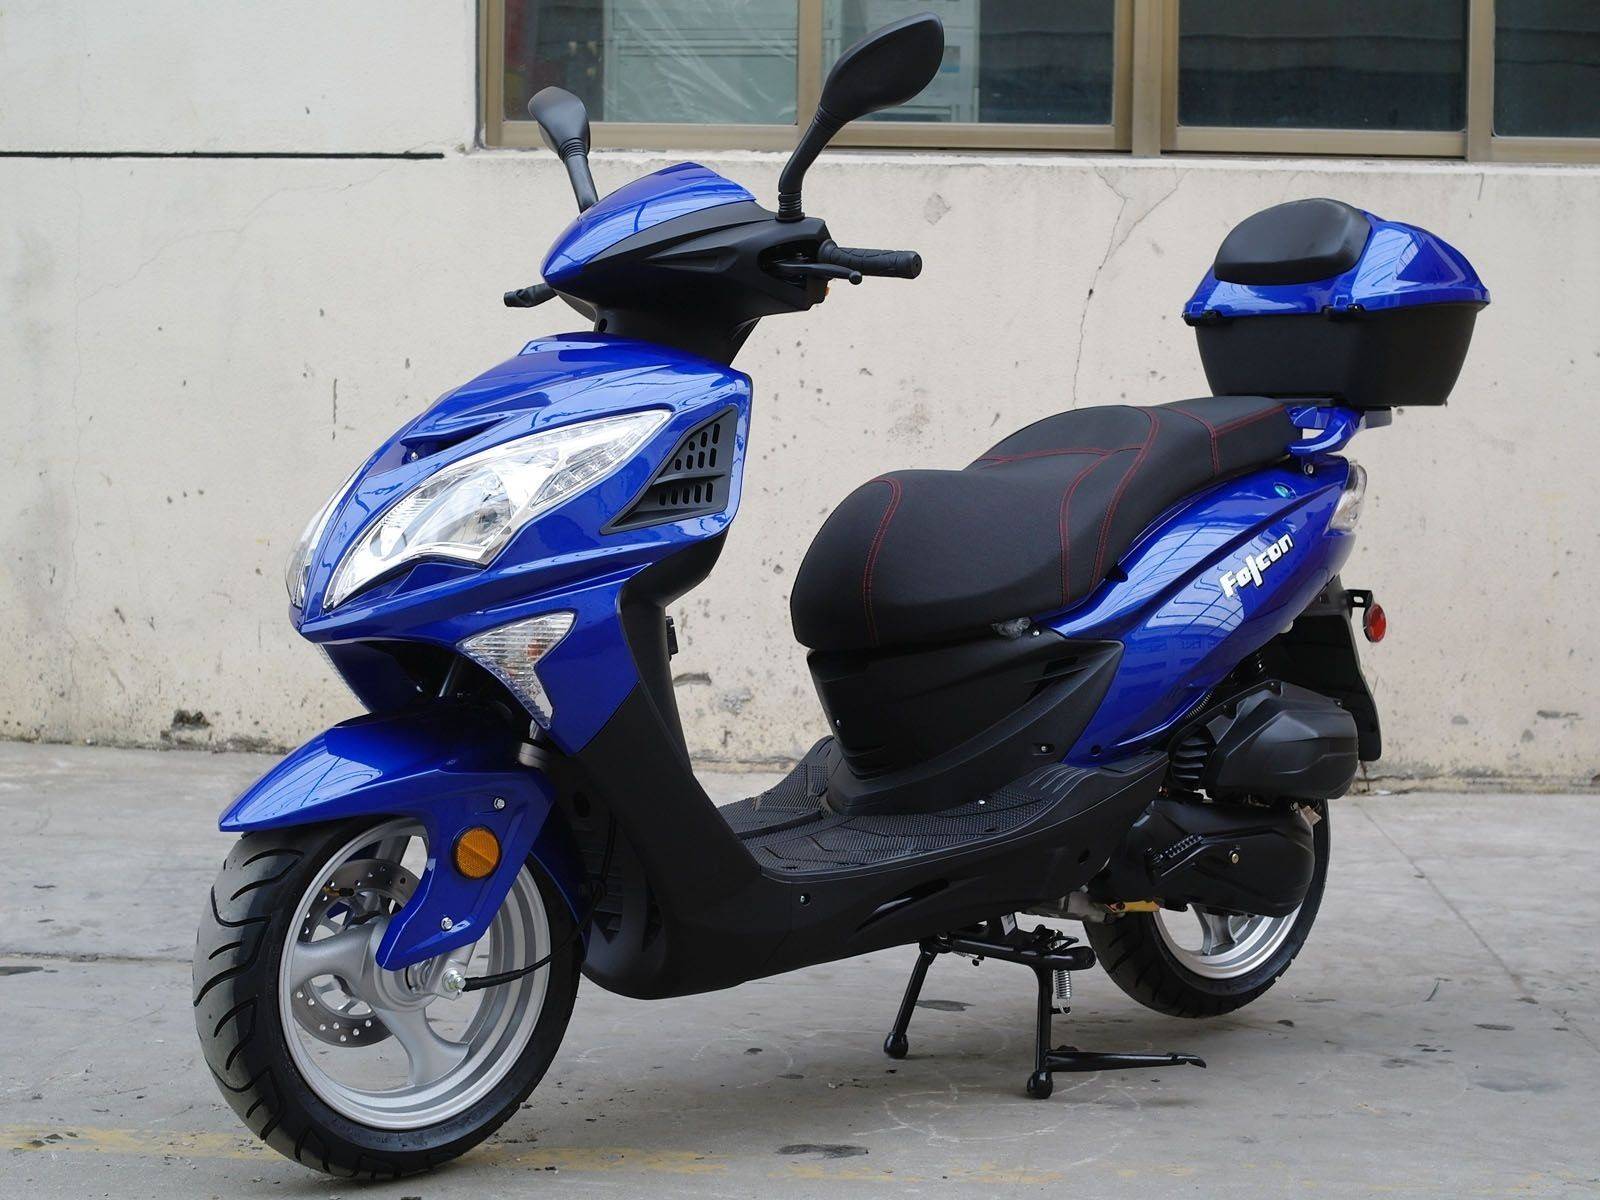 200cc Gas Moped Scooter Falcon Blue, 200cc Automatic CVT Engine, Big Wheel  and Body | redfoxpowersports